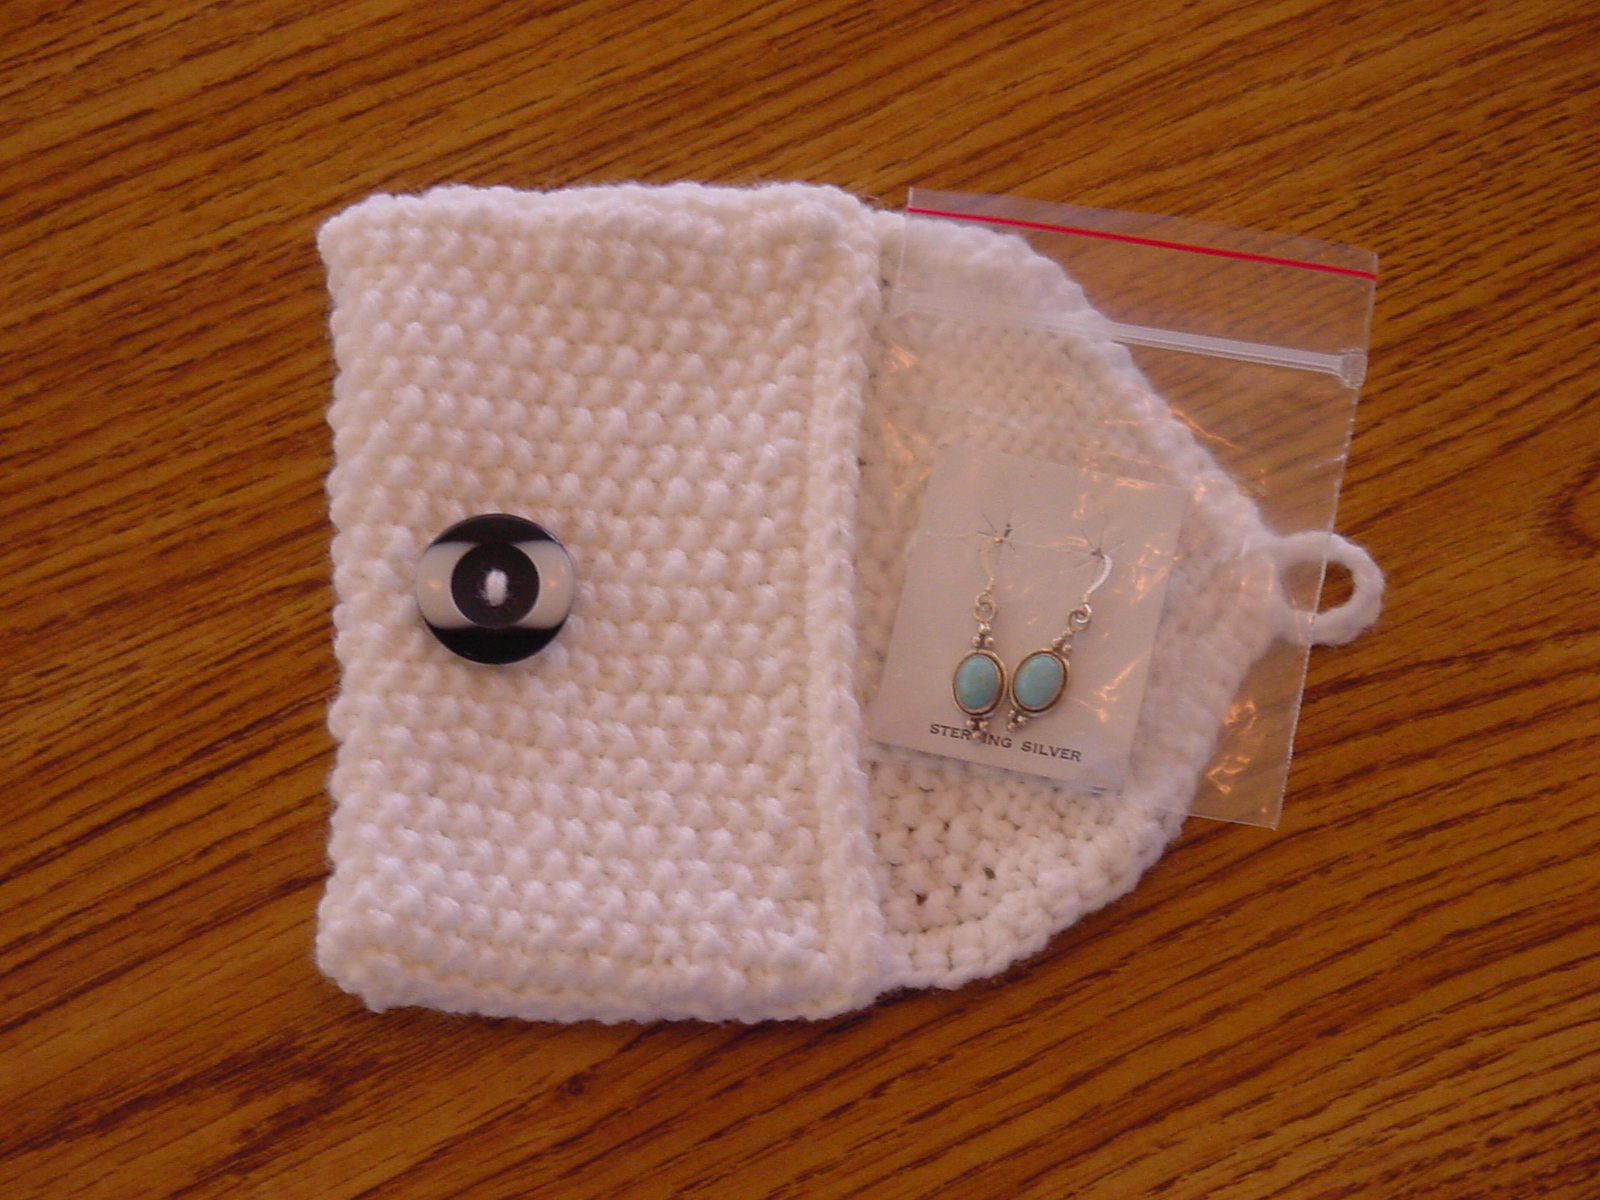 Birthday Earrings in Knitted Gift Pouch